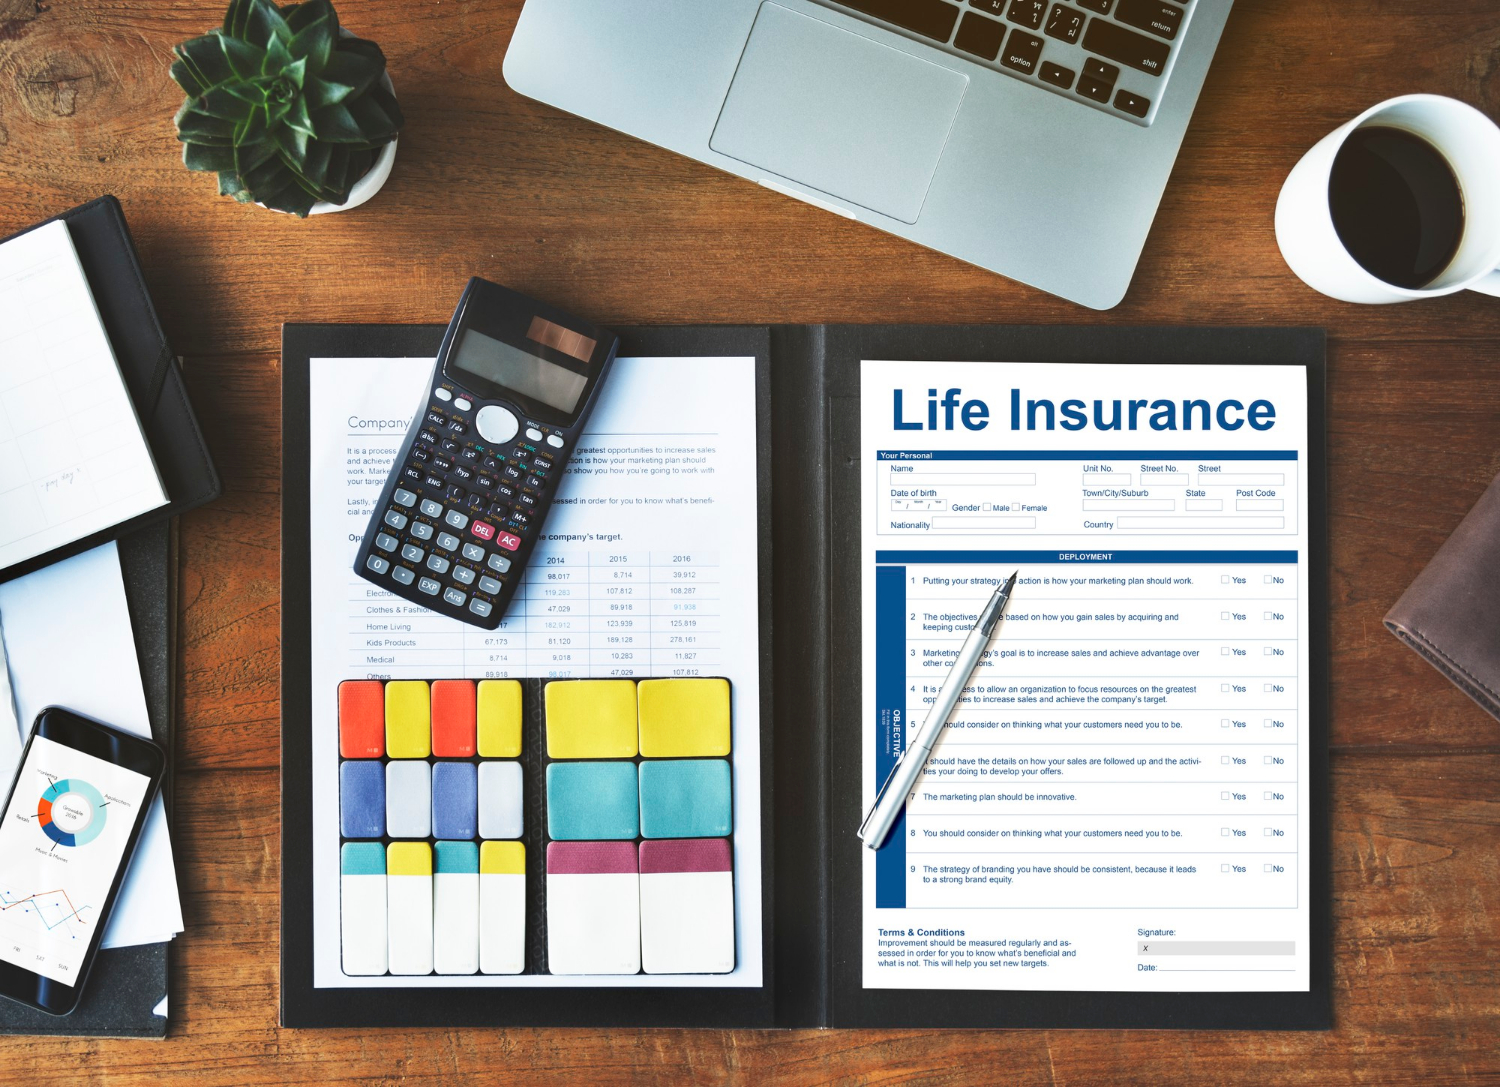 Comparing and Contrasting Different Types of Life Insurance Policies